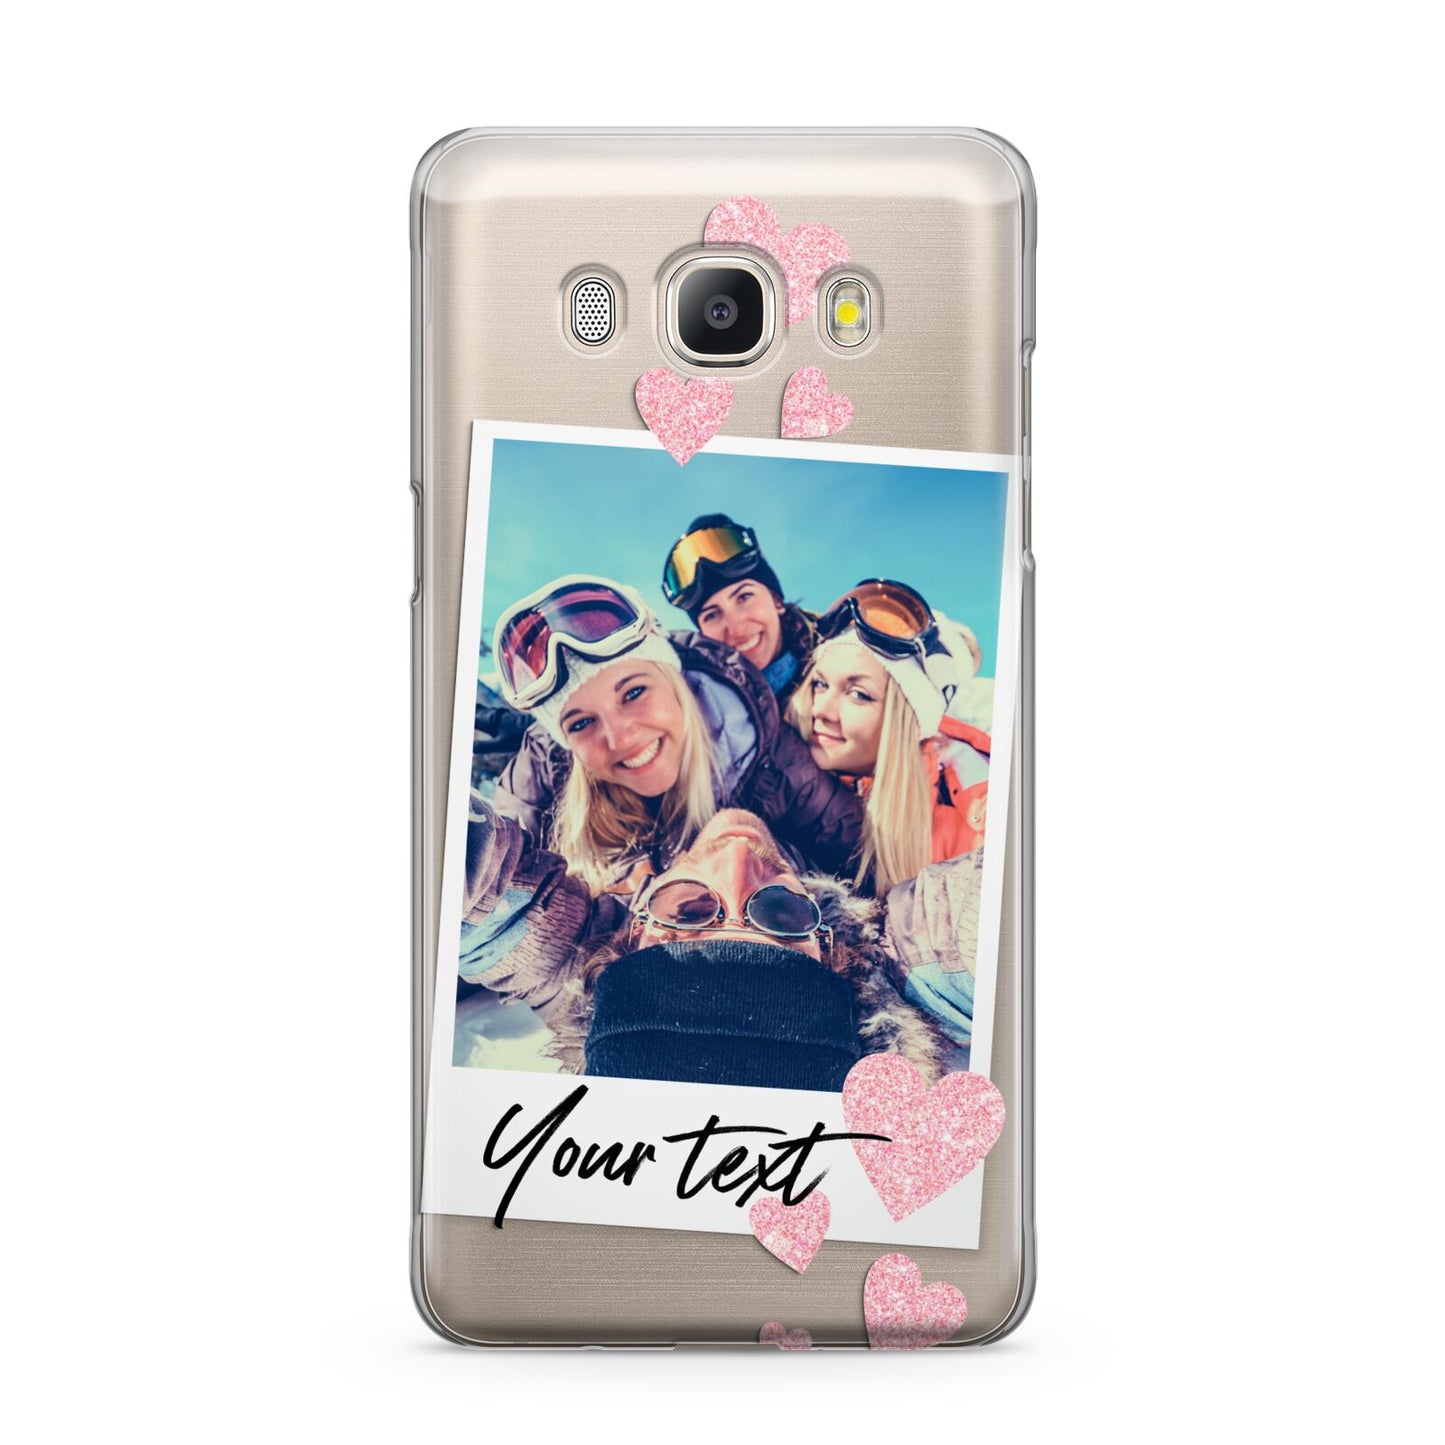 Photo with Text Samsung Galaxy J5 2016 Case